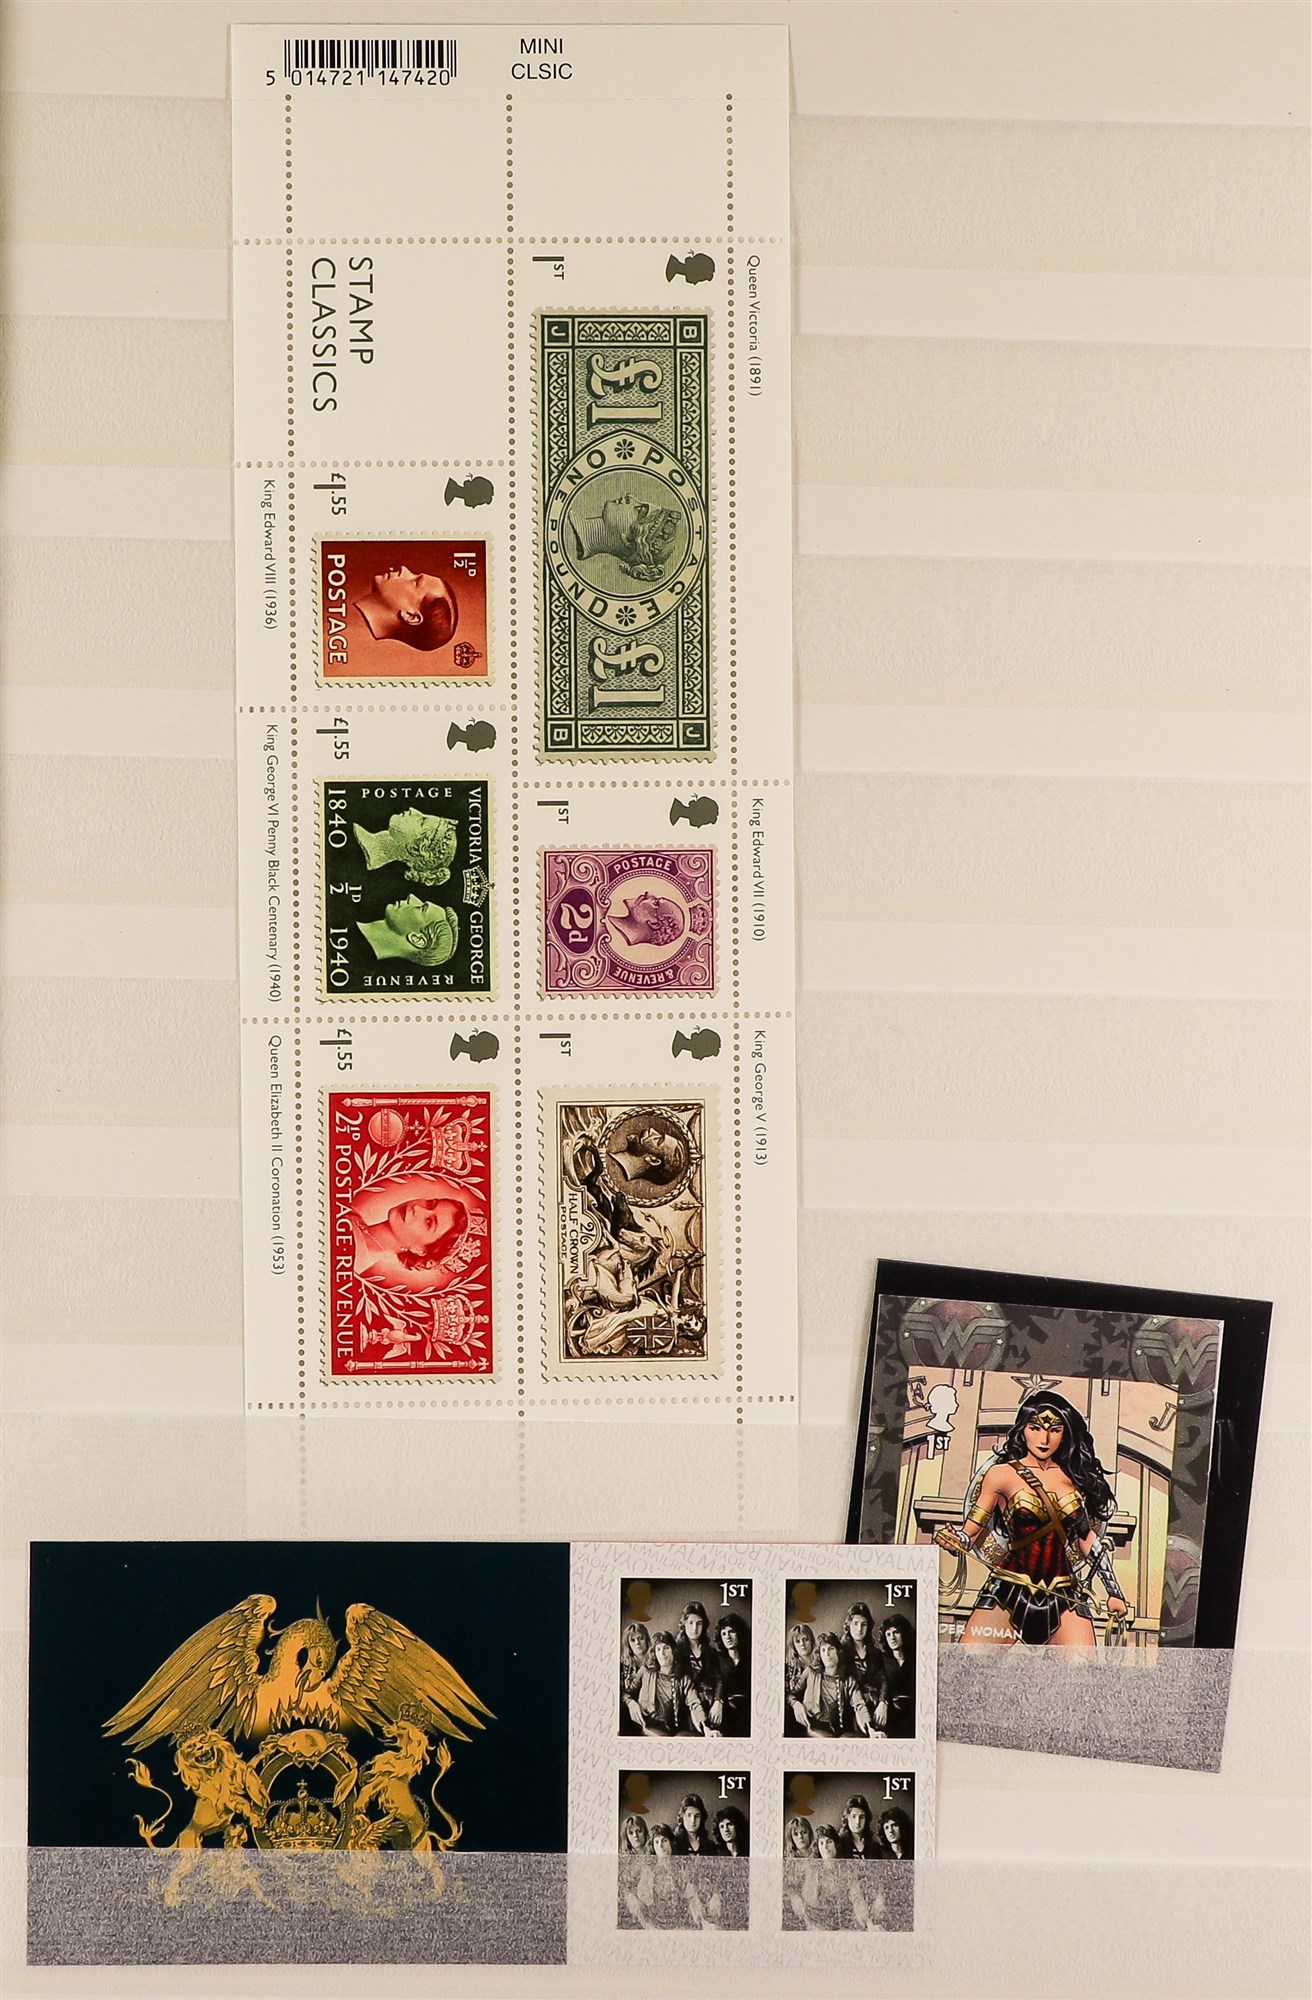 GB.ELIZABETH II NEVER HINGED MINT RANGES Mostly 2000's issues in stockbook, includes Smiler - Image 9 of 10